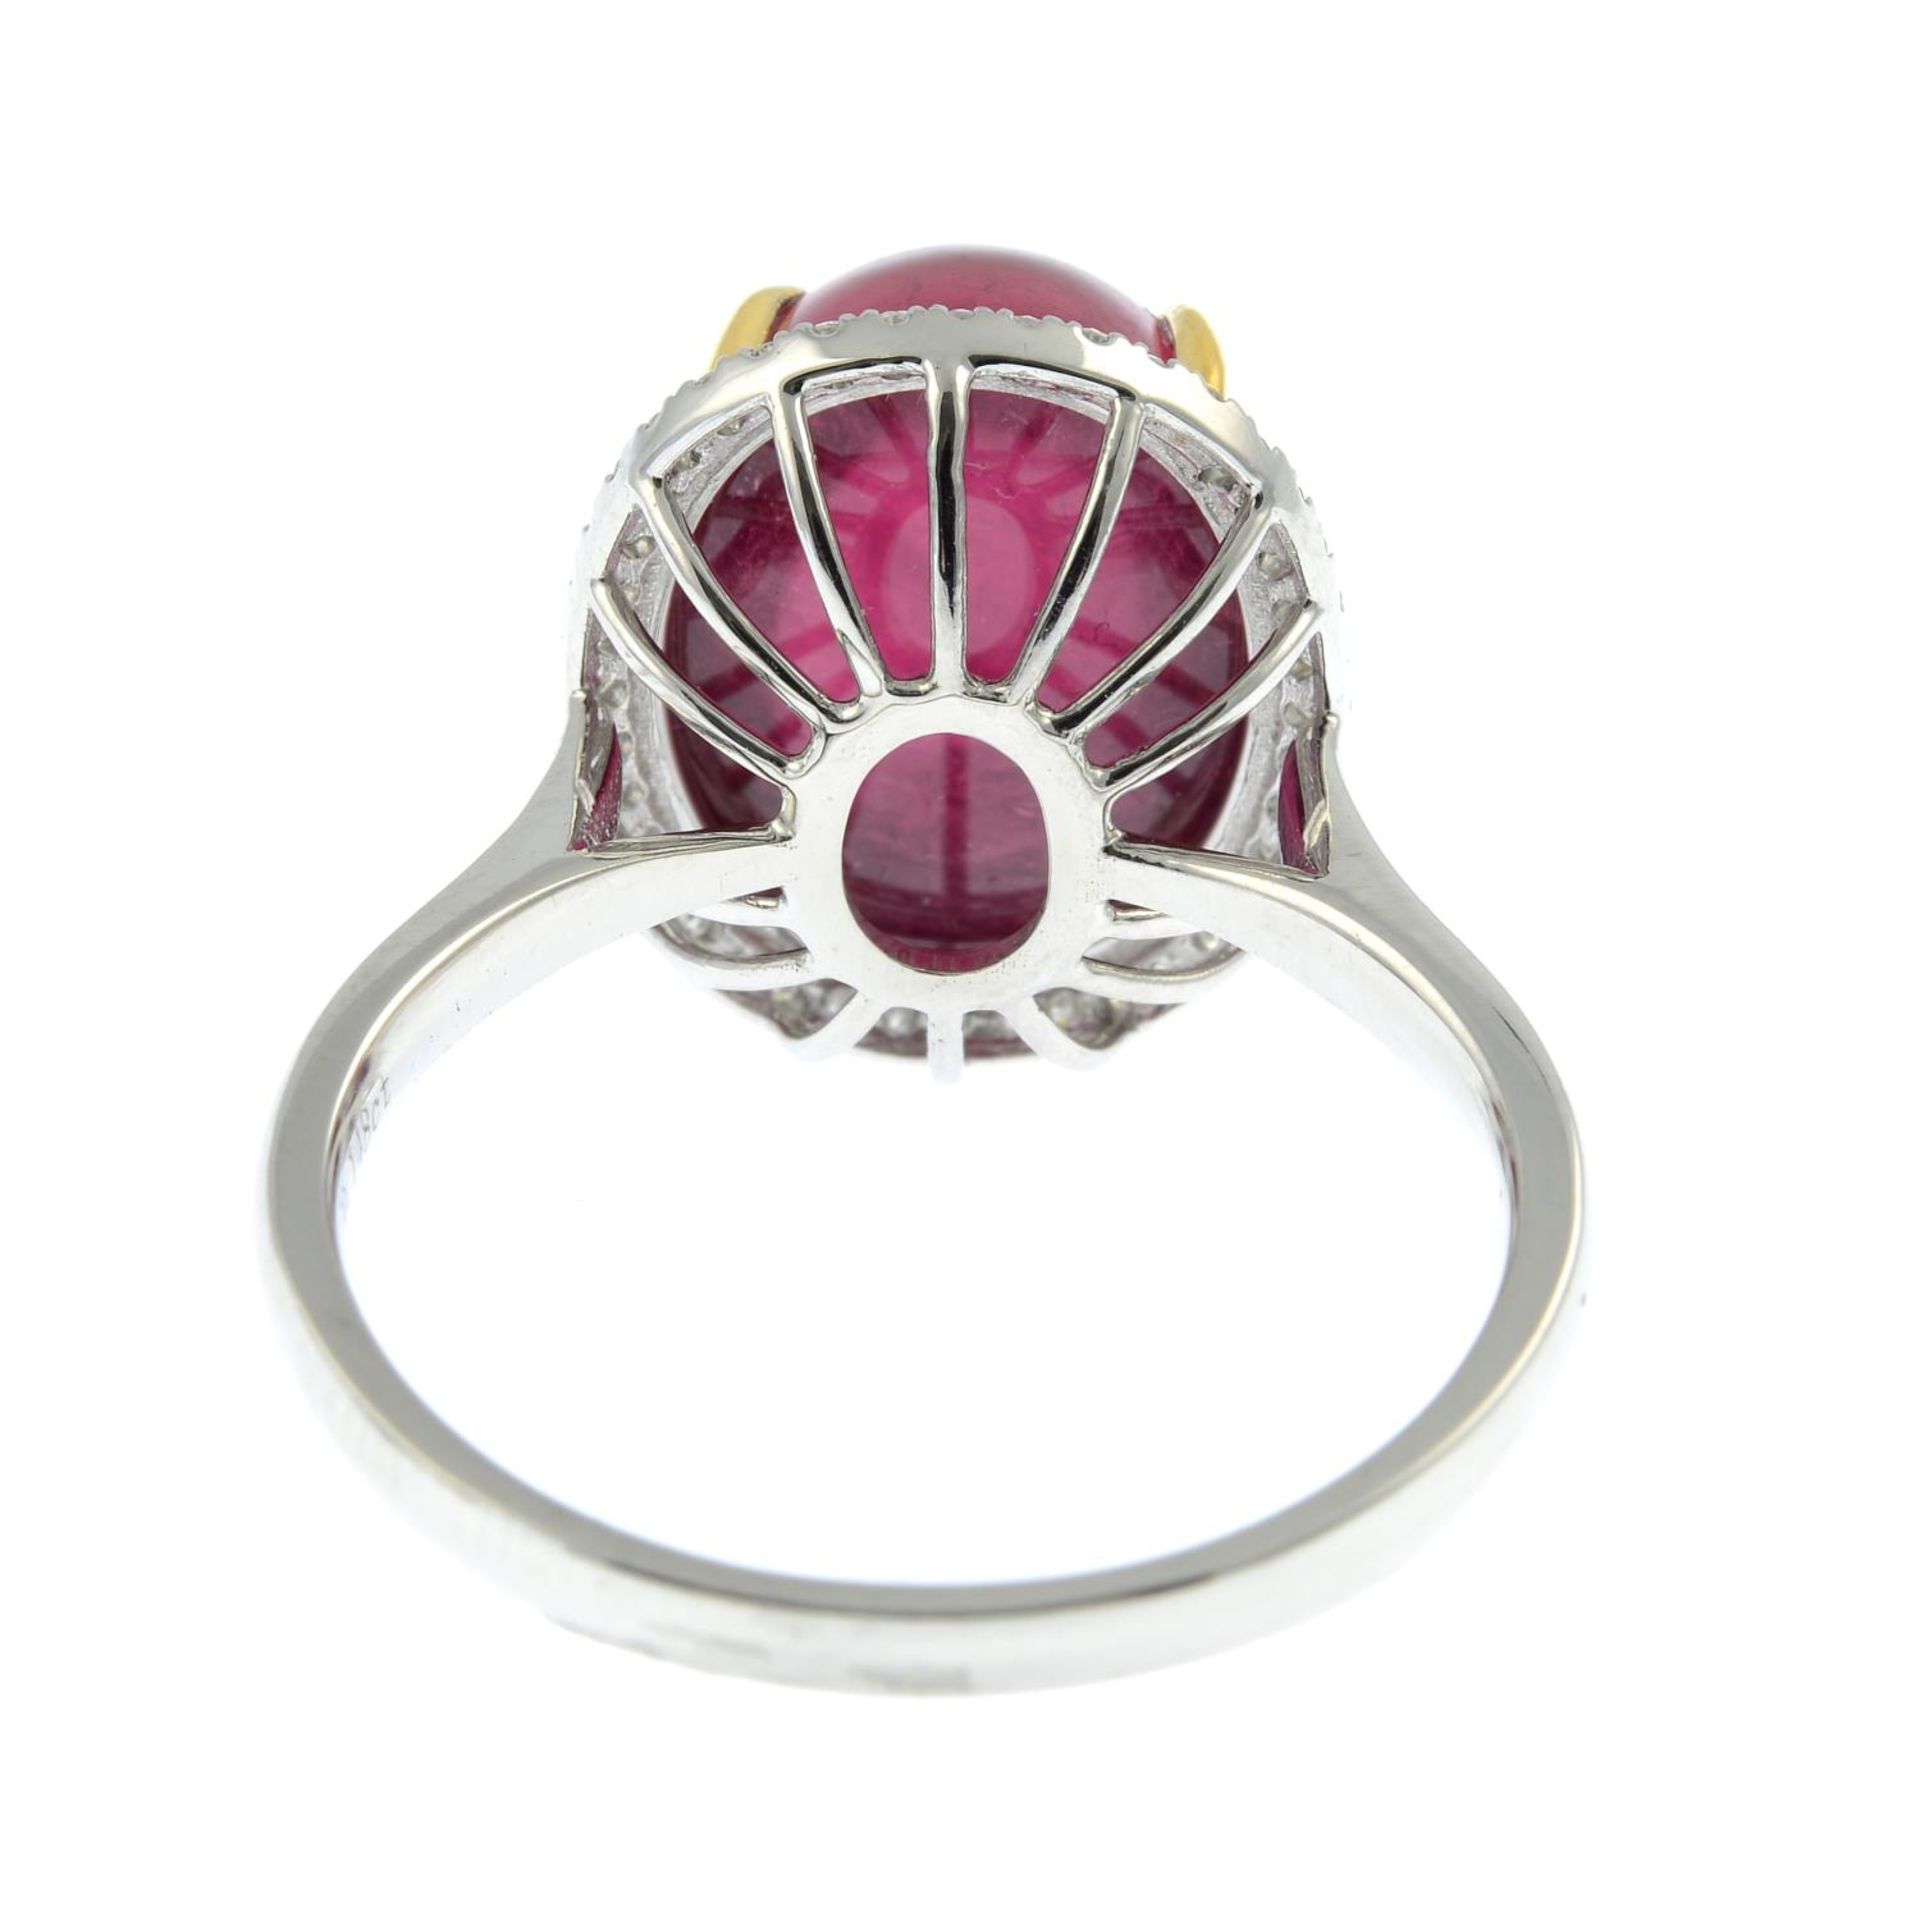 A pink tourmaline and brilliant-cut diamond cluster ring.Tourmaline weight 8.10cts, - Image 3 of 3